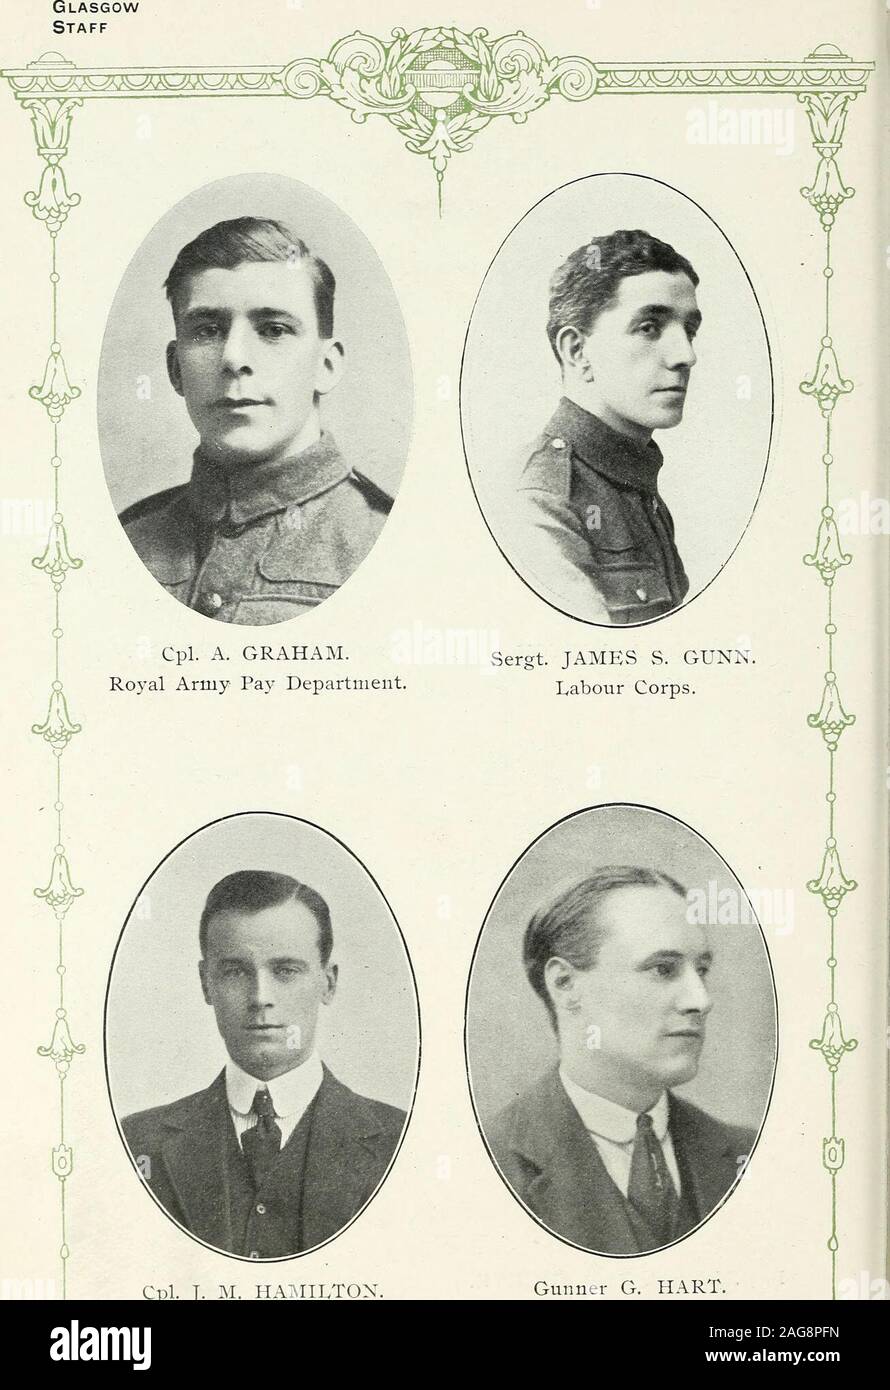 . Record of partners, staff and operatives who participated in the Great War, 1914-1919. Pte. R. GILLIES.A. & S. Highlanders.. Cpl. J. M. HAMILTON4th R.S.F. Gunner G. HART.R.F.A. 6 CpL A, Graham, Royal Army Pay Department. Cpl. Graham, Karachi Finance Department. Enlistedin the Royal Army Pay Department, 4th July, 1917. Sergt. Jas. S. Gunn. Labour Corps. Sergt. Gunn, Karachi Finance Department. Enlistedin the Glasgow Highlanders on 21st November, 1914,but later was transferred to the Royal Scots andLabour Corps. Cpl. J. M. Hamilton. 4th Royal Scots Fusiliers. Cpl. Hamilton, White Goods Departm Stock Photo